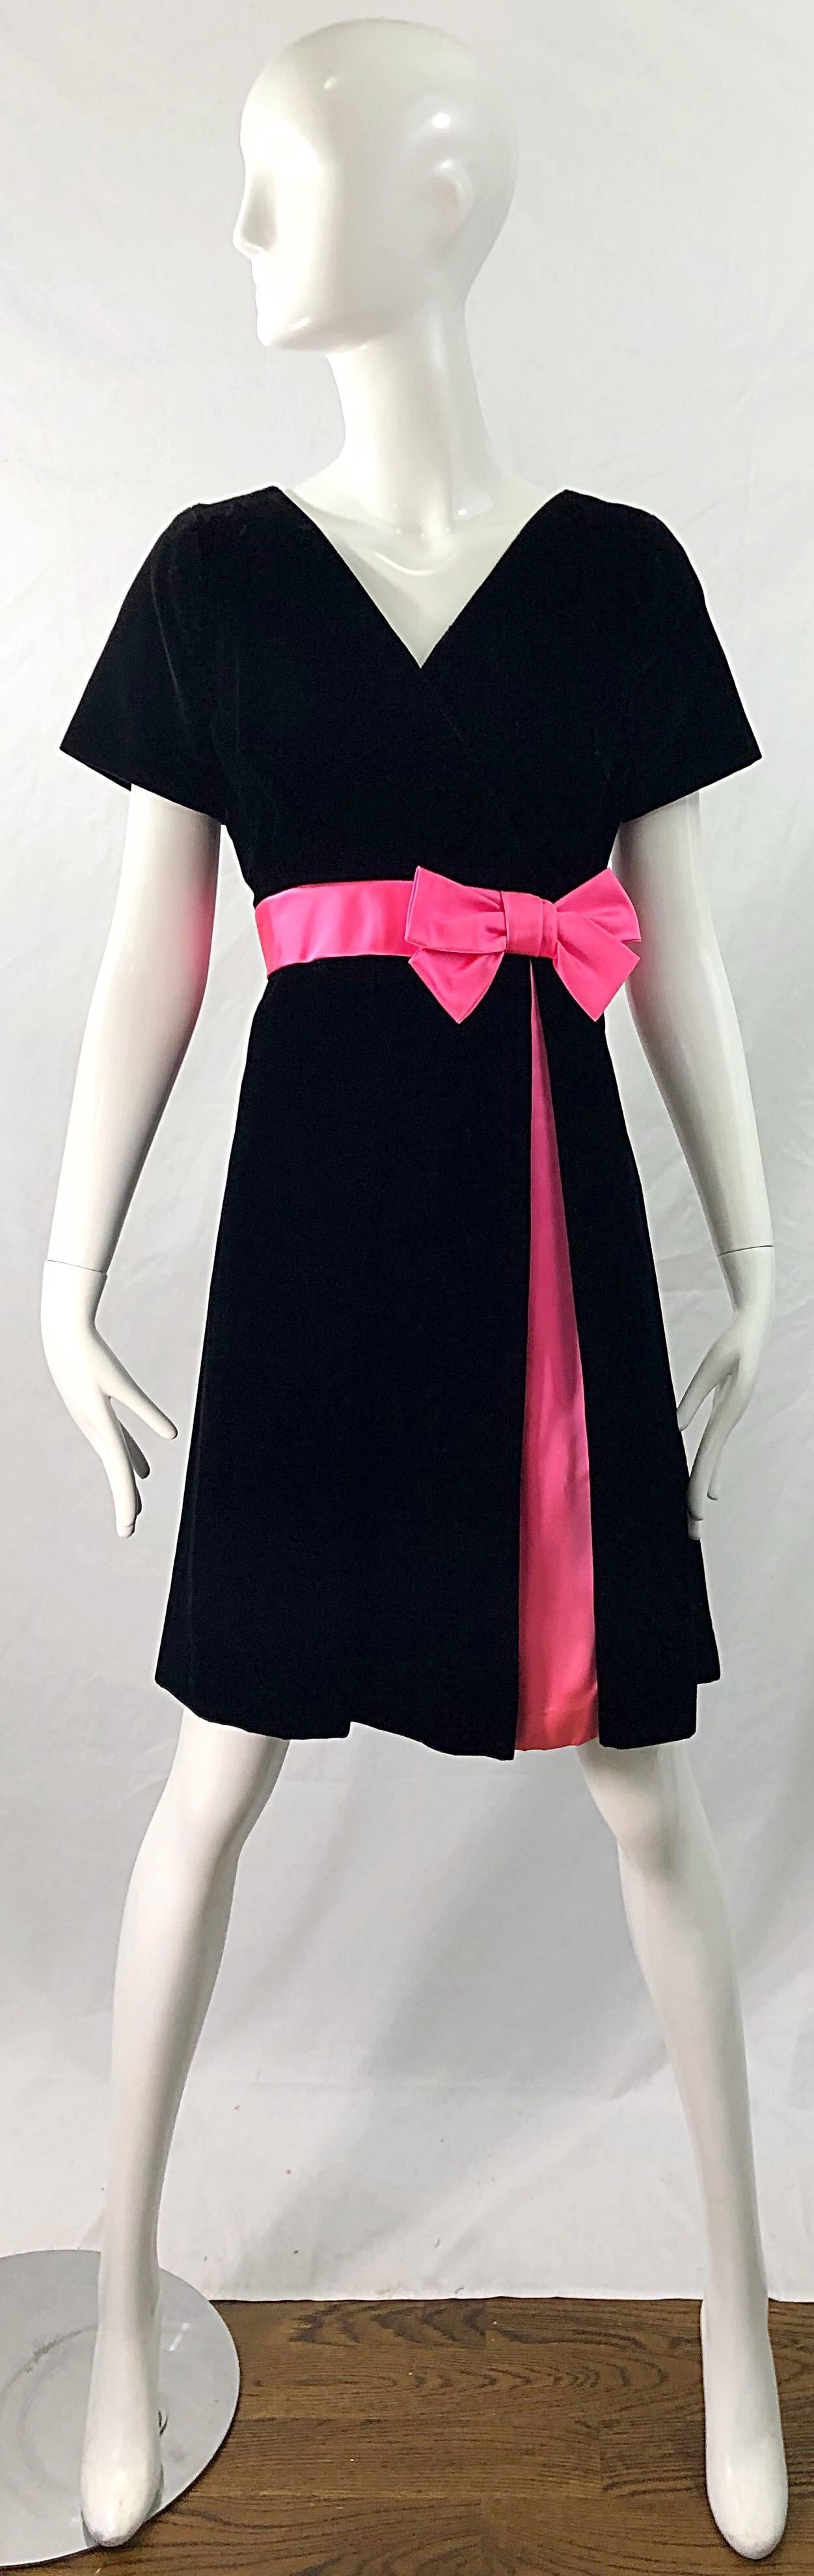 Gorgeous 1950s demi couture black velvet and hot pink silk fit n' flare dress ! Features a tailored bodice with a full skirt. Hot pink bow detail at left side. Matching pink fabric also peaks out down the side of the skirt. Full metal zipper up the